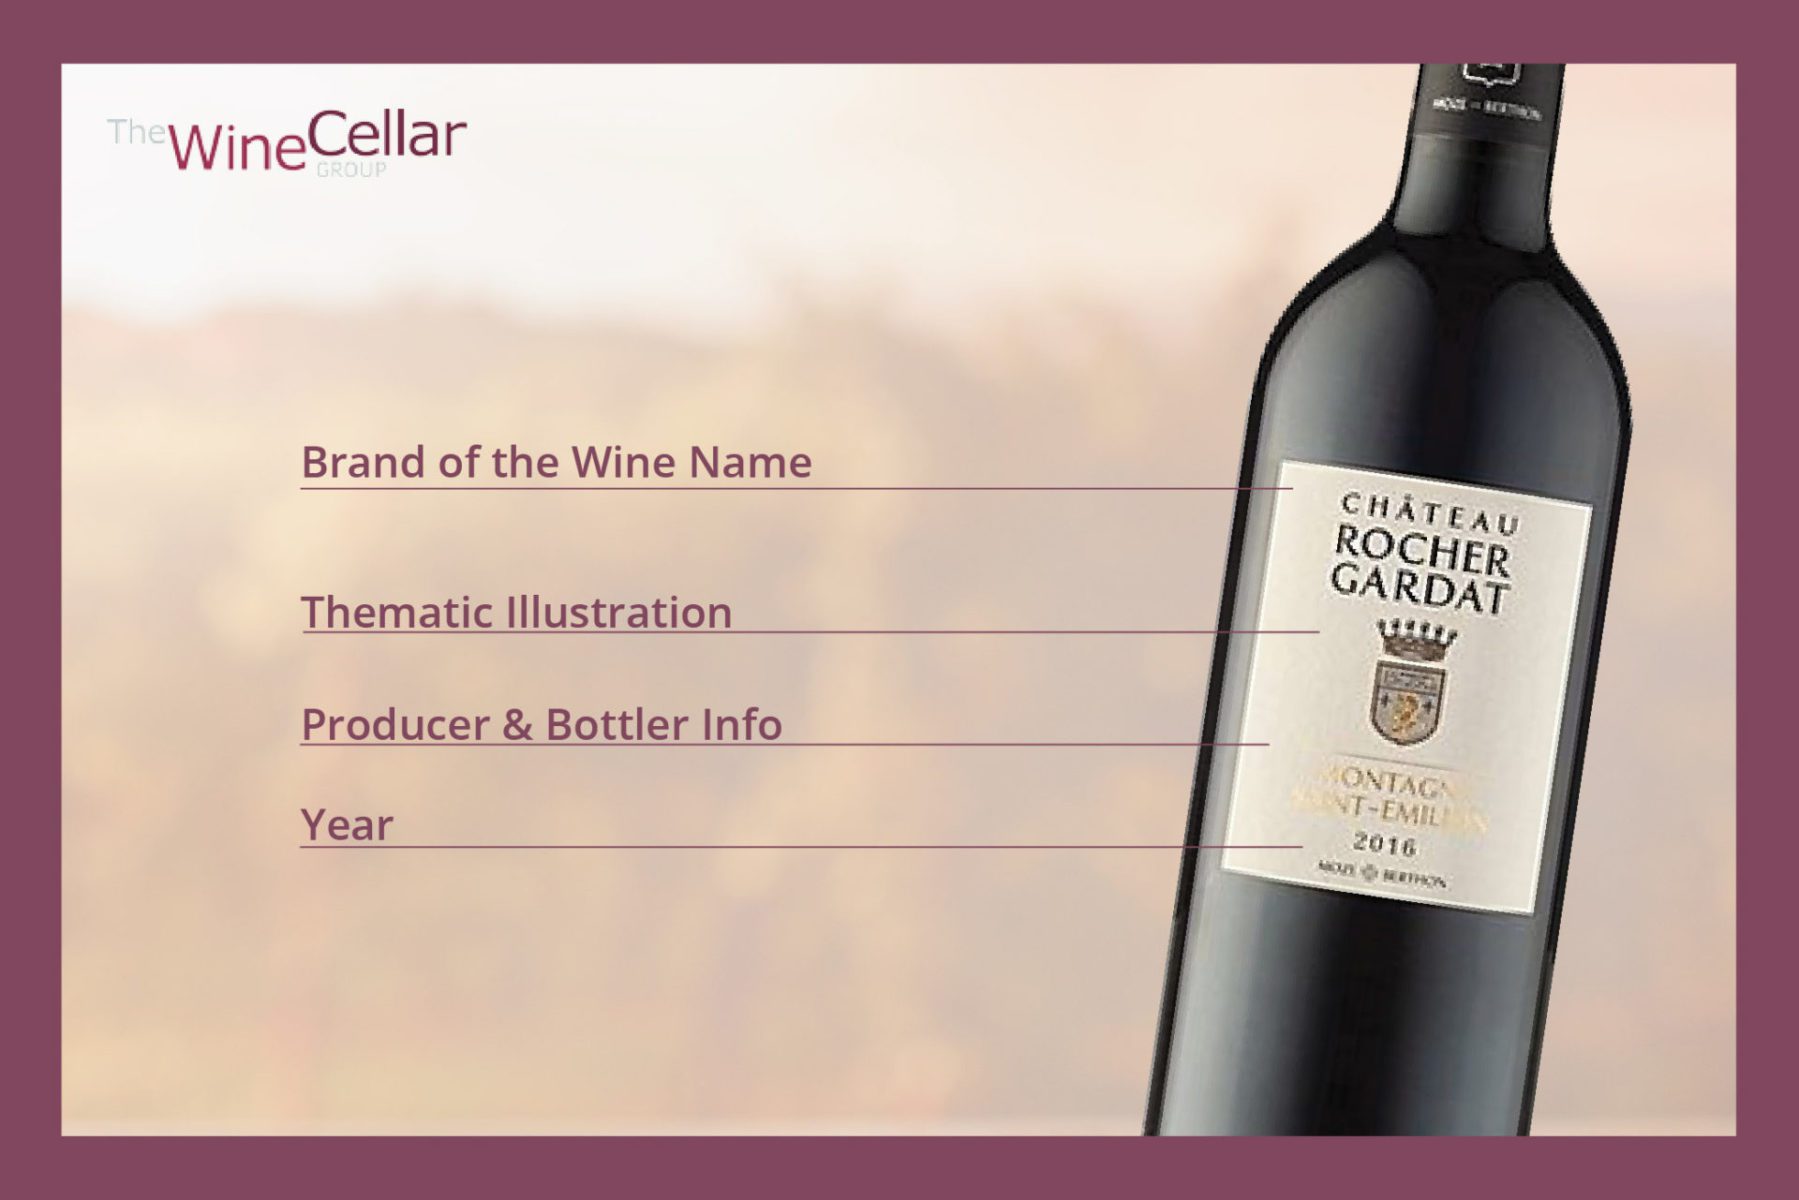 wine-labels-101-how-to-read-wine-bottle-labels-wine-cellar-group